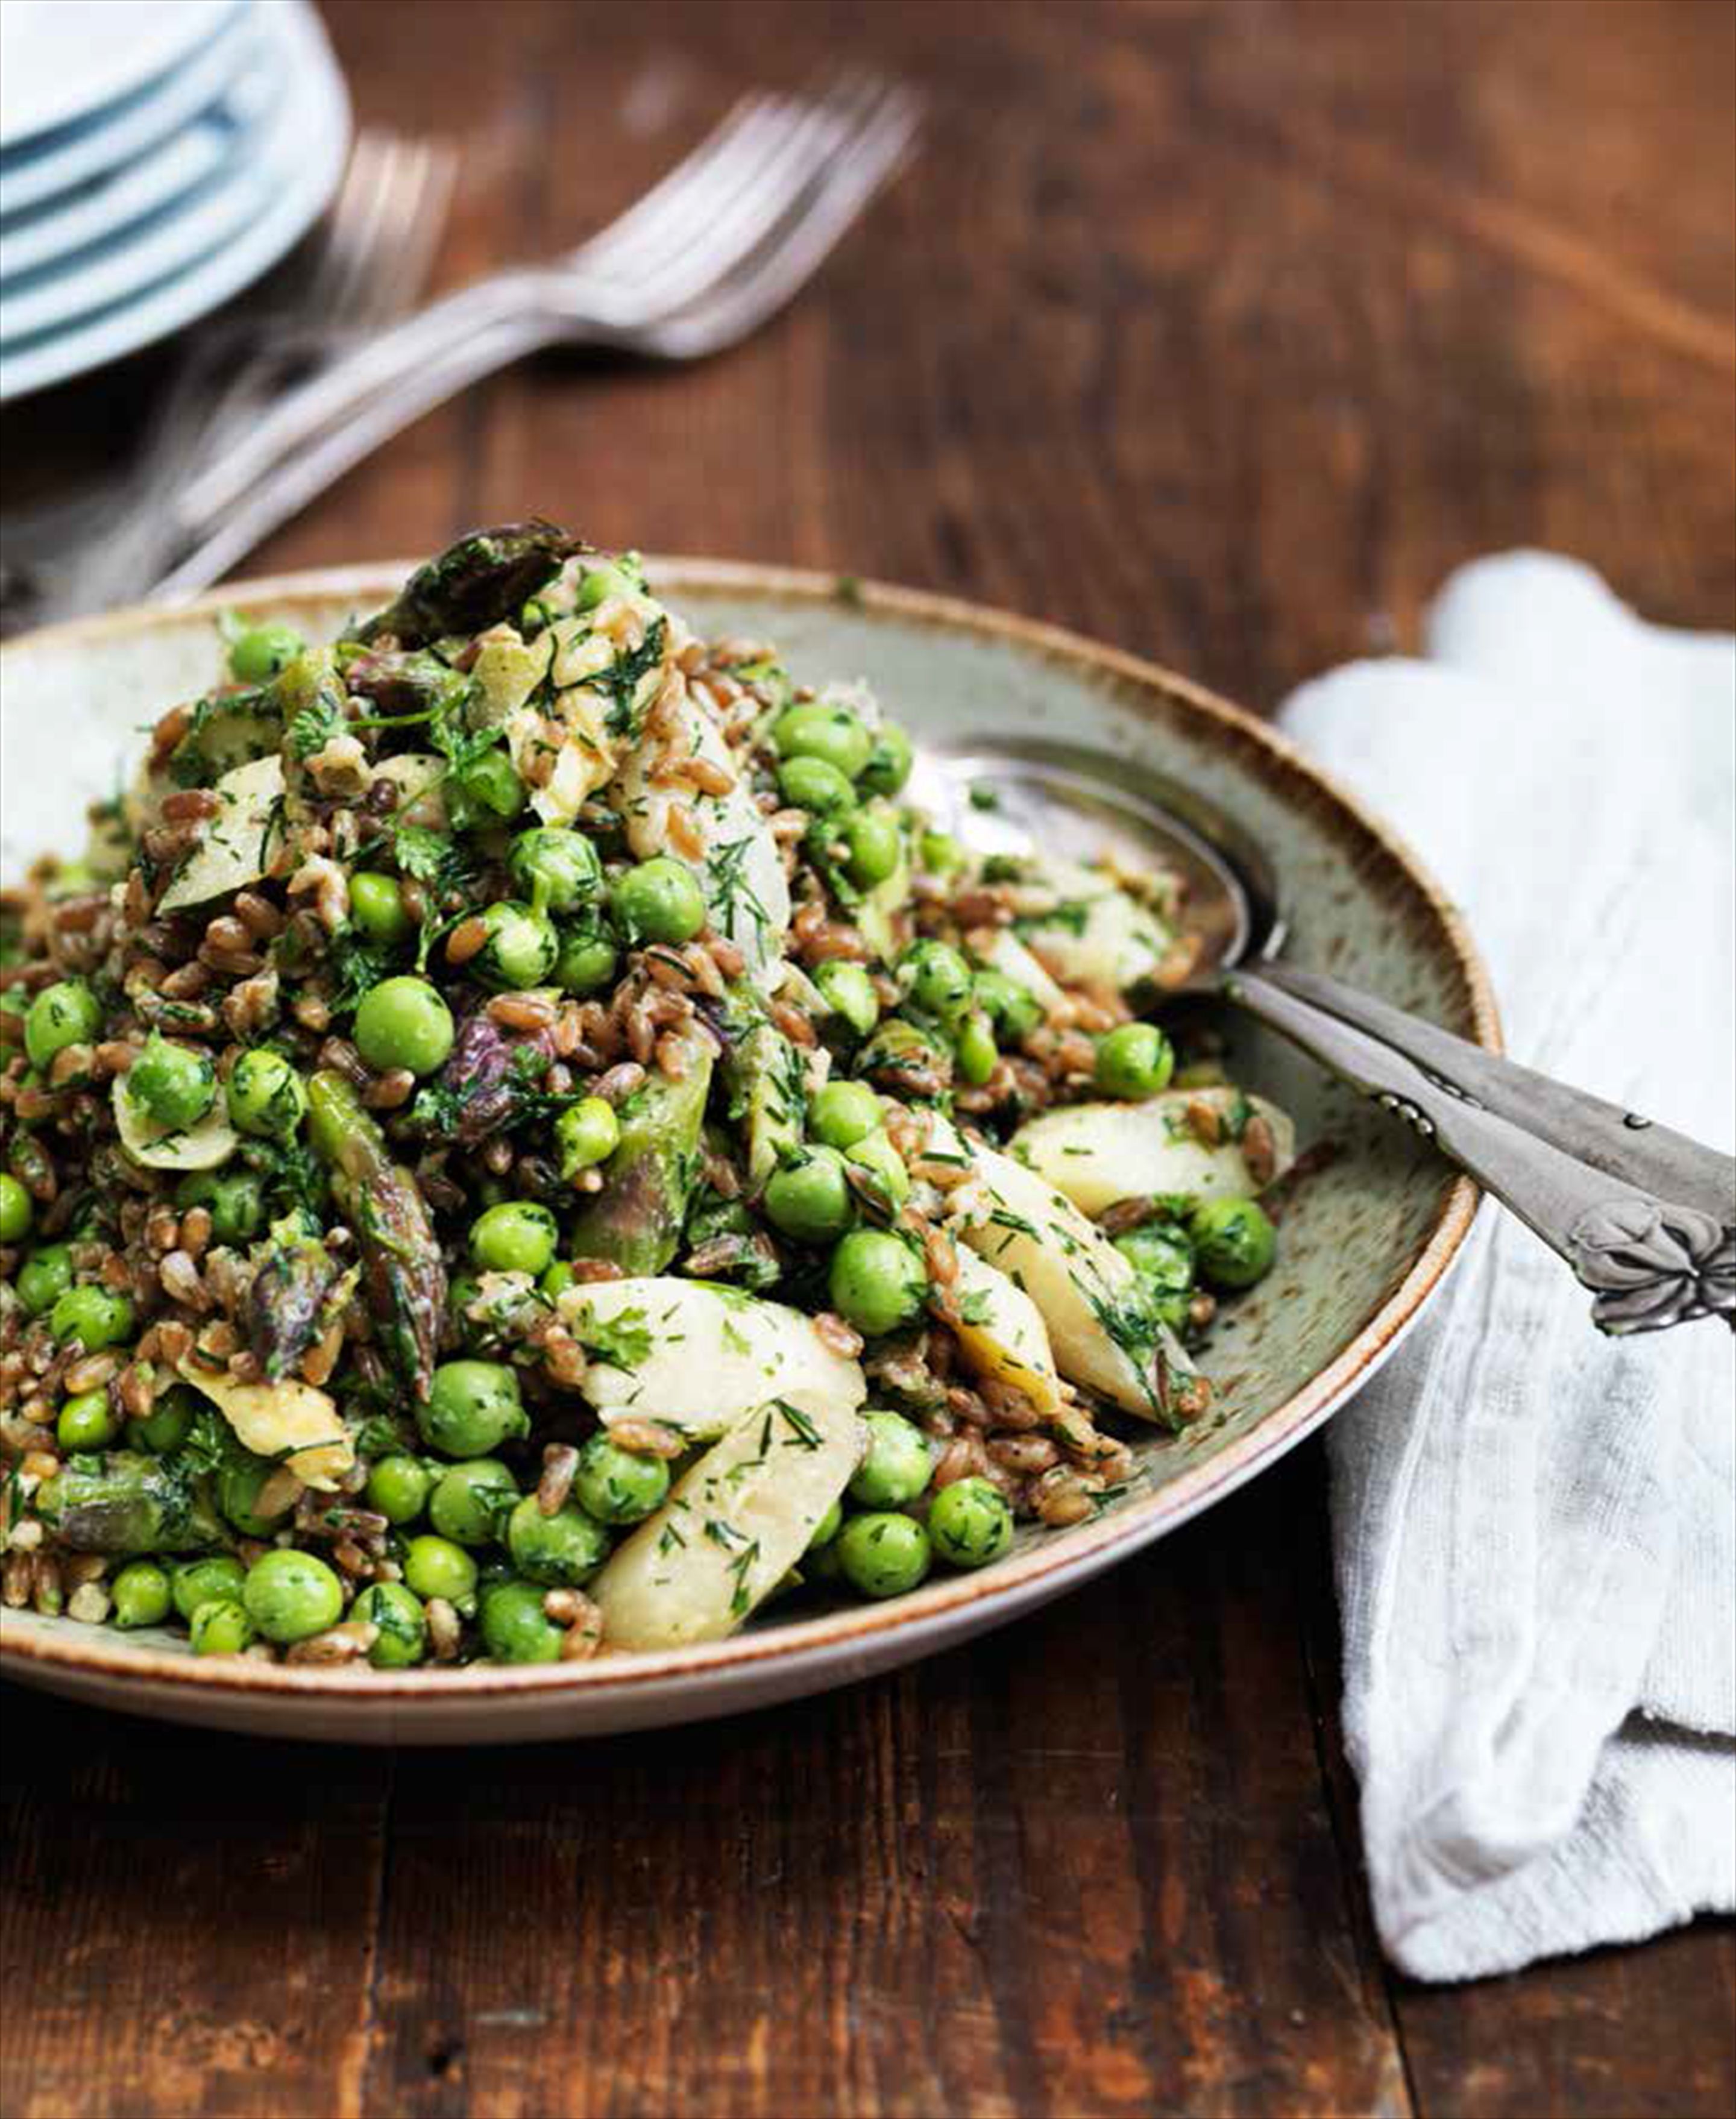 Spring rye grain salad with asparagus, peas and dill